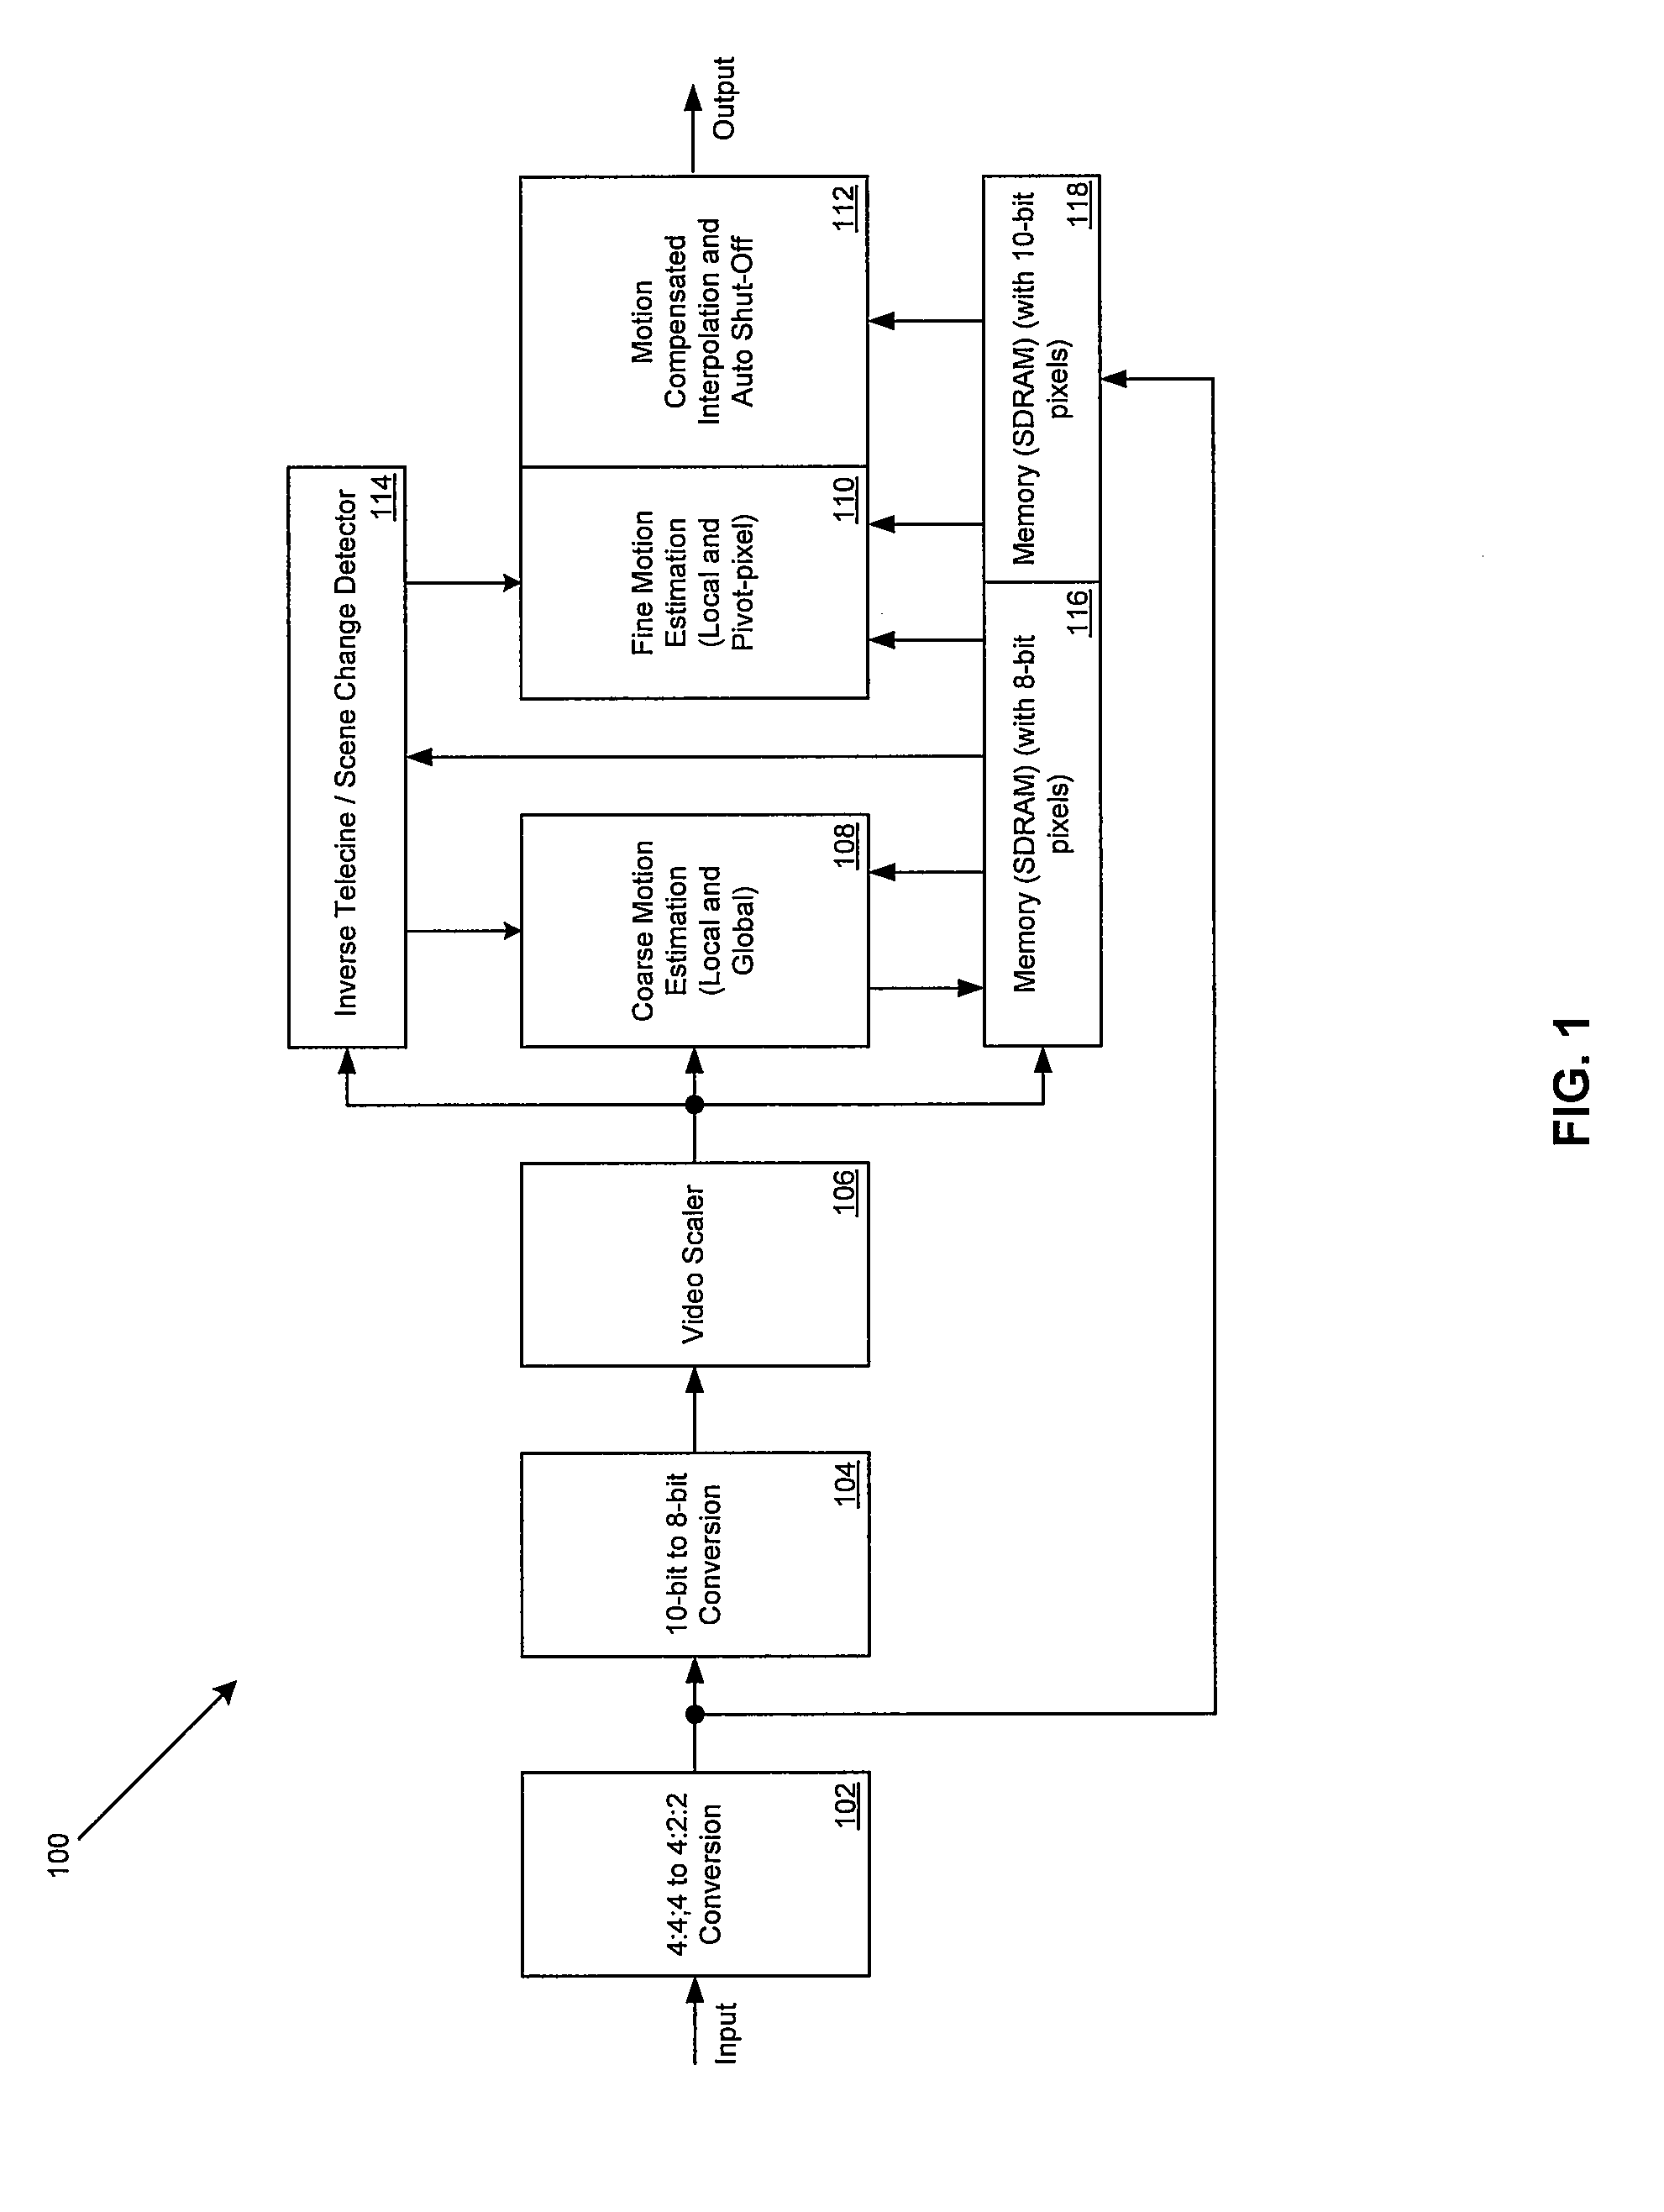 Method and System for Automatically Turning Off Motion Compensation When Motion Vectors are Inaccurate